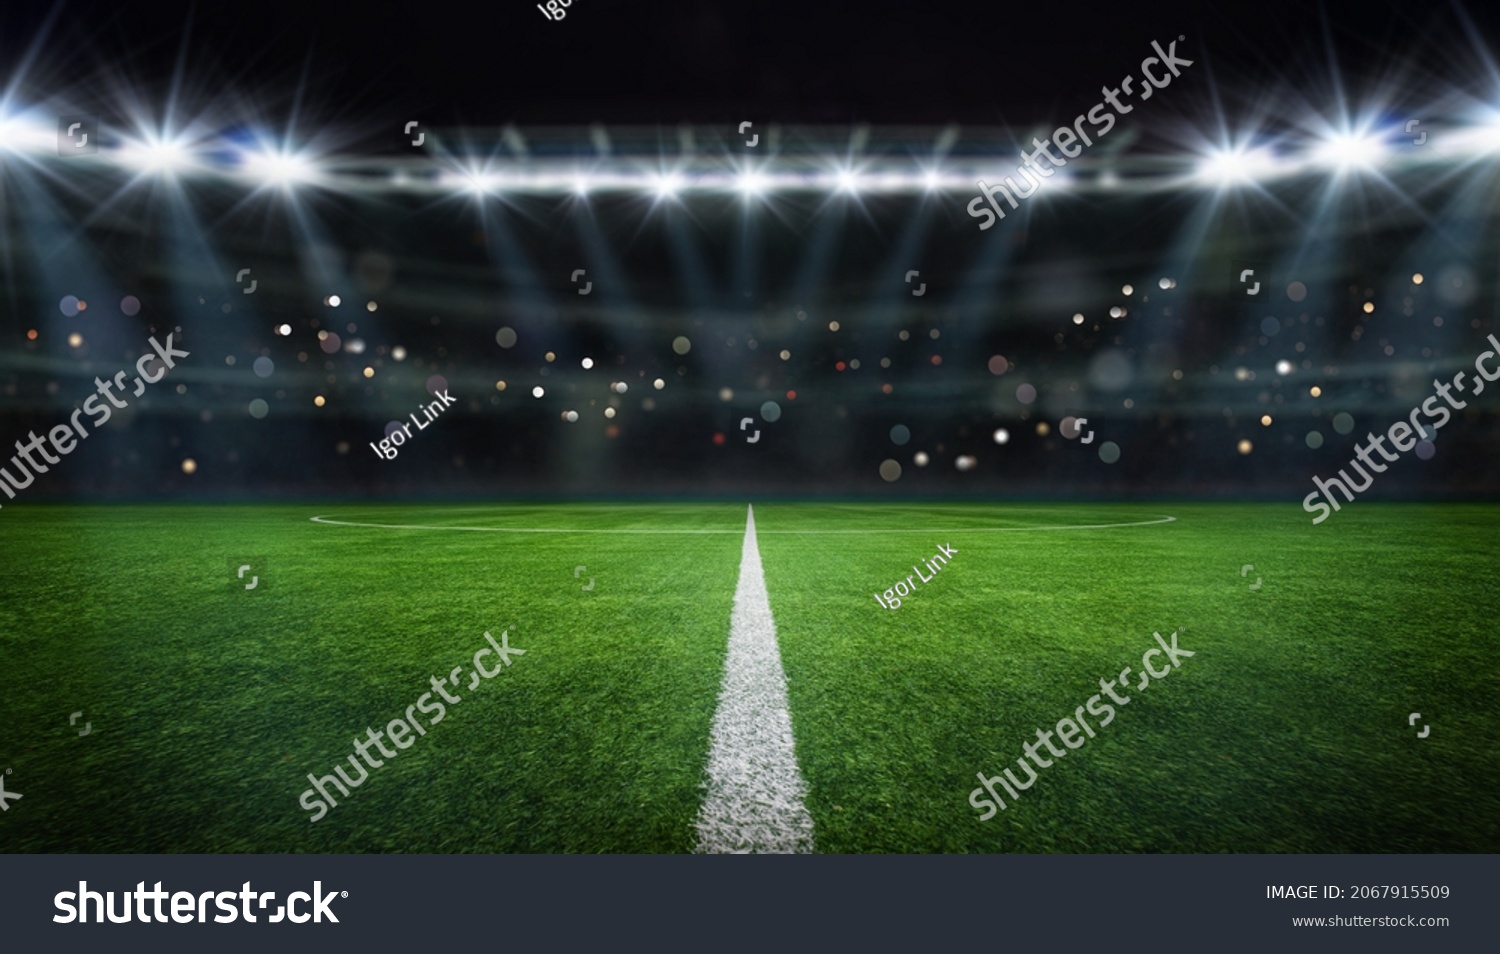 textured free soccer field in the evening light - center, midfield #2067915509